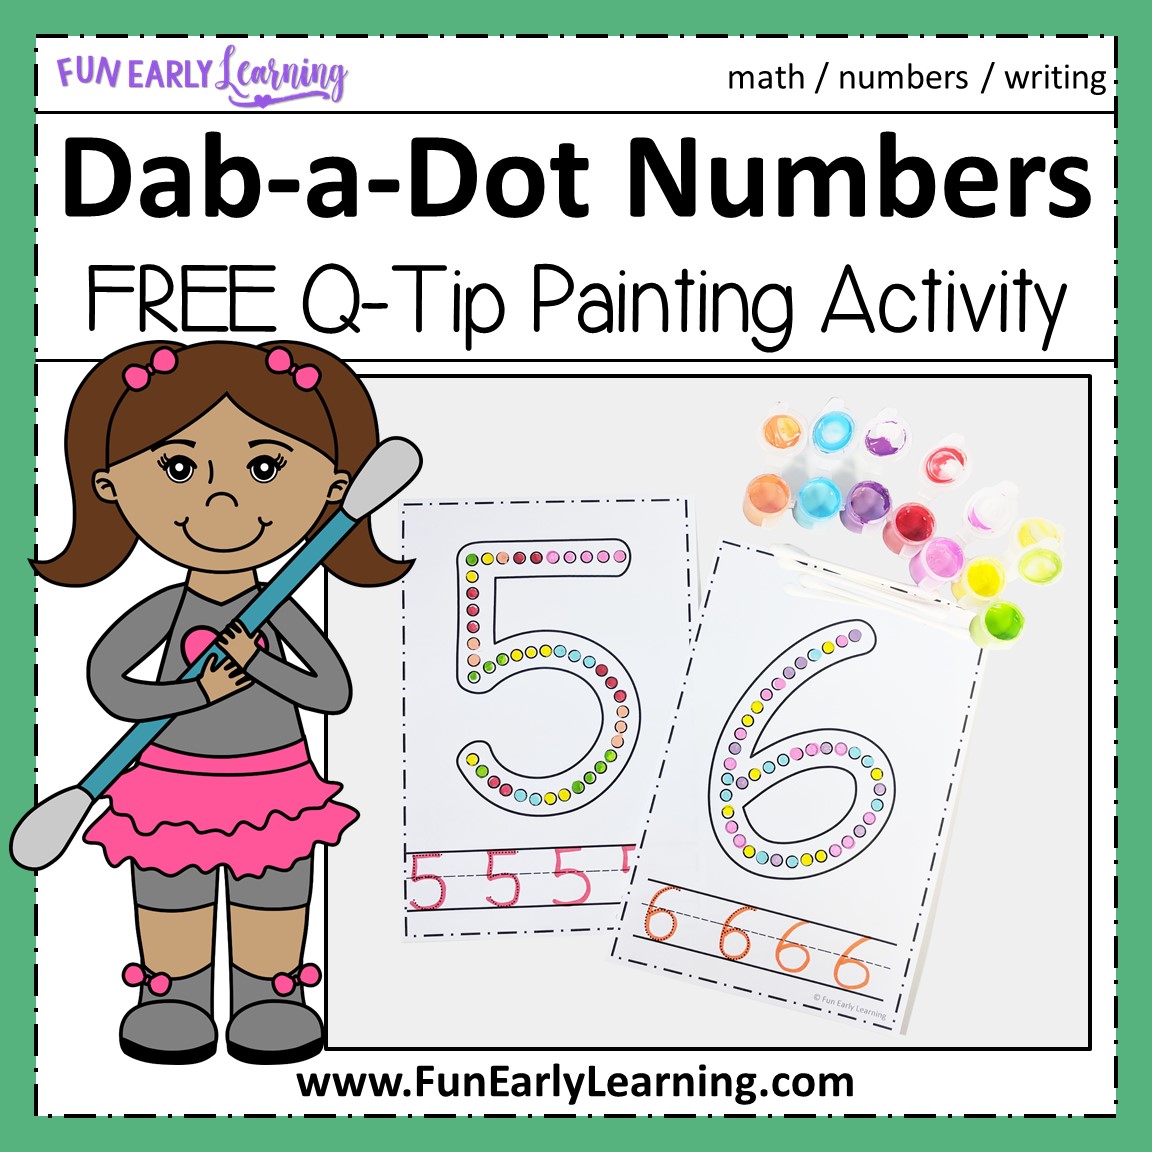 Dab-a-Dot Numbers Q-Tip Painting for Early Math and Fine Motor Skills